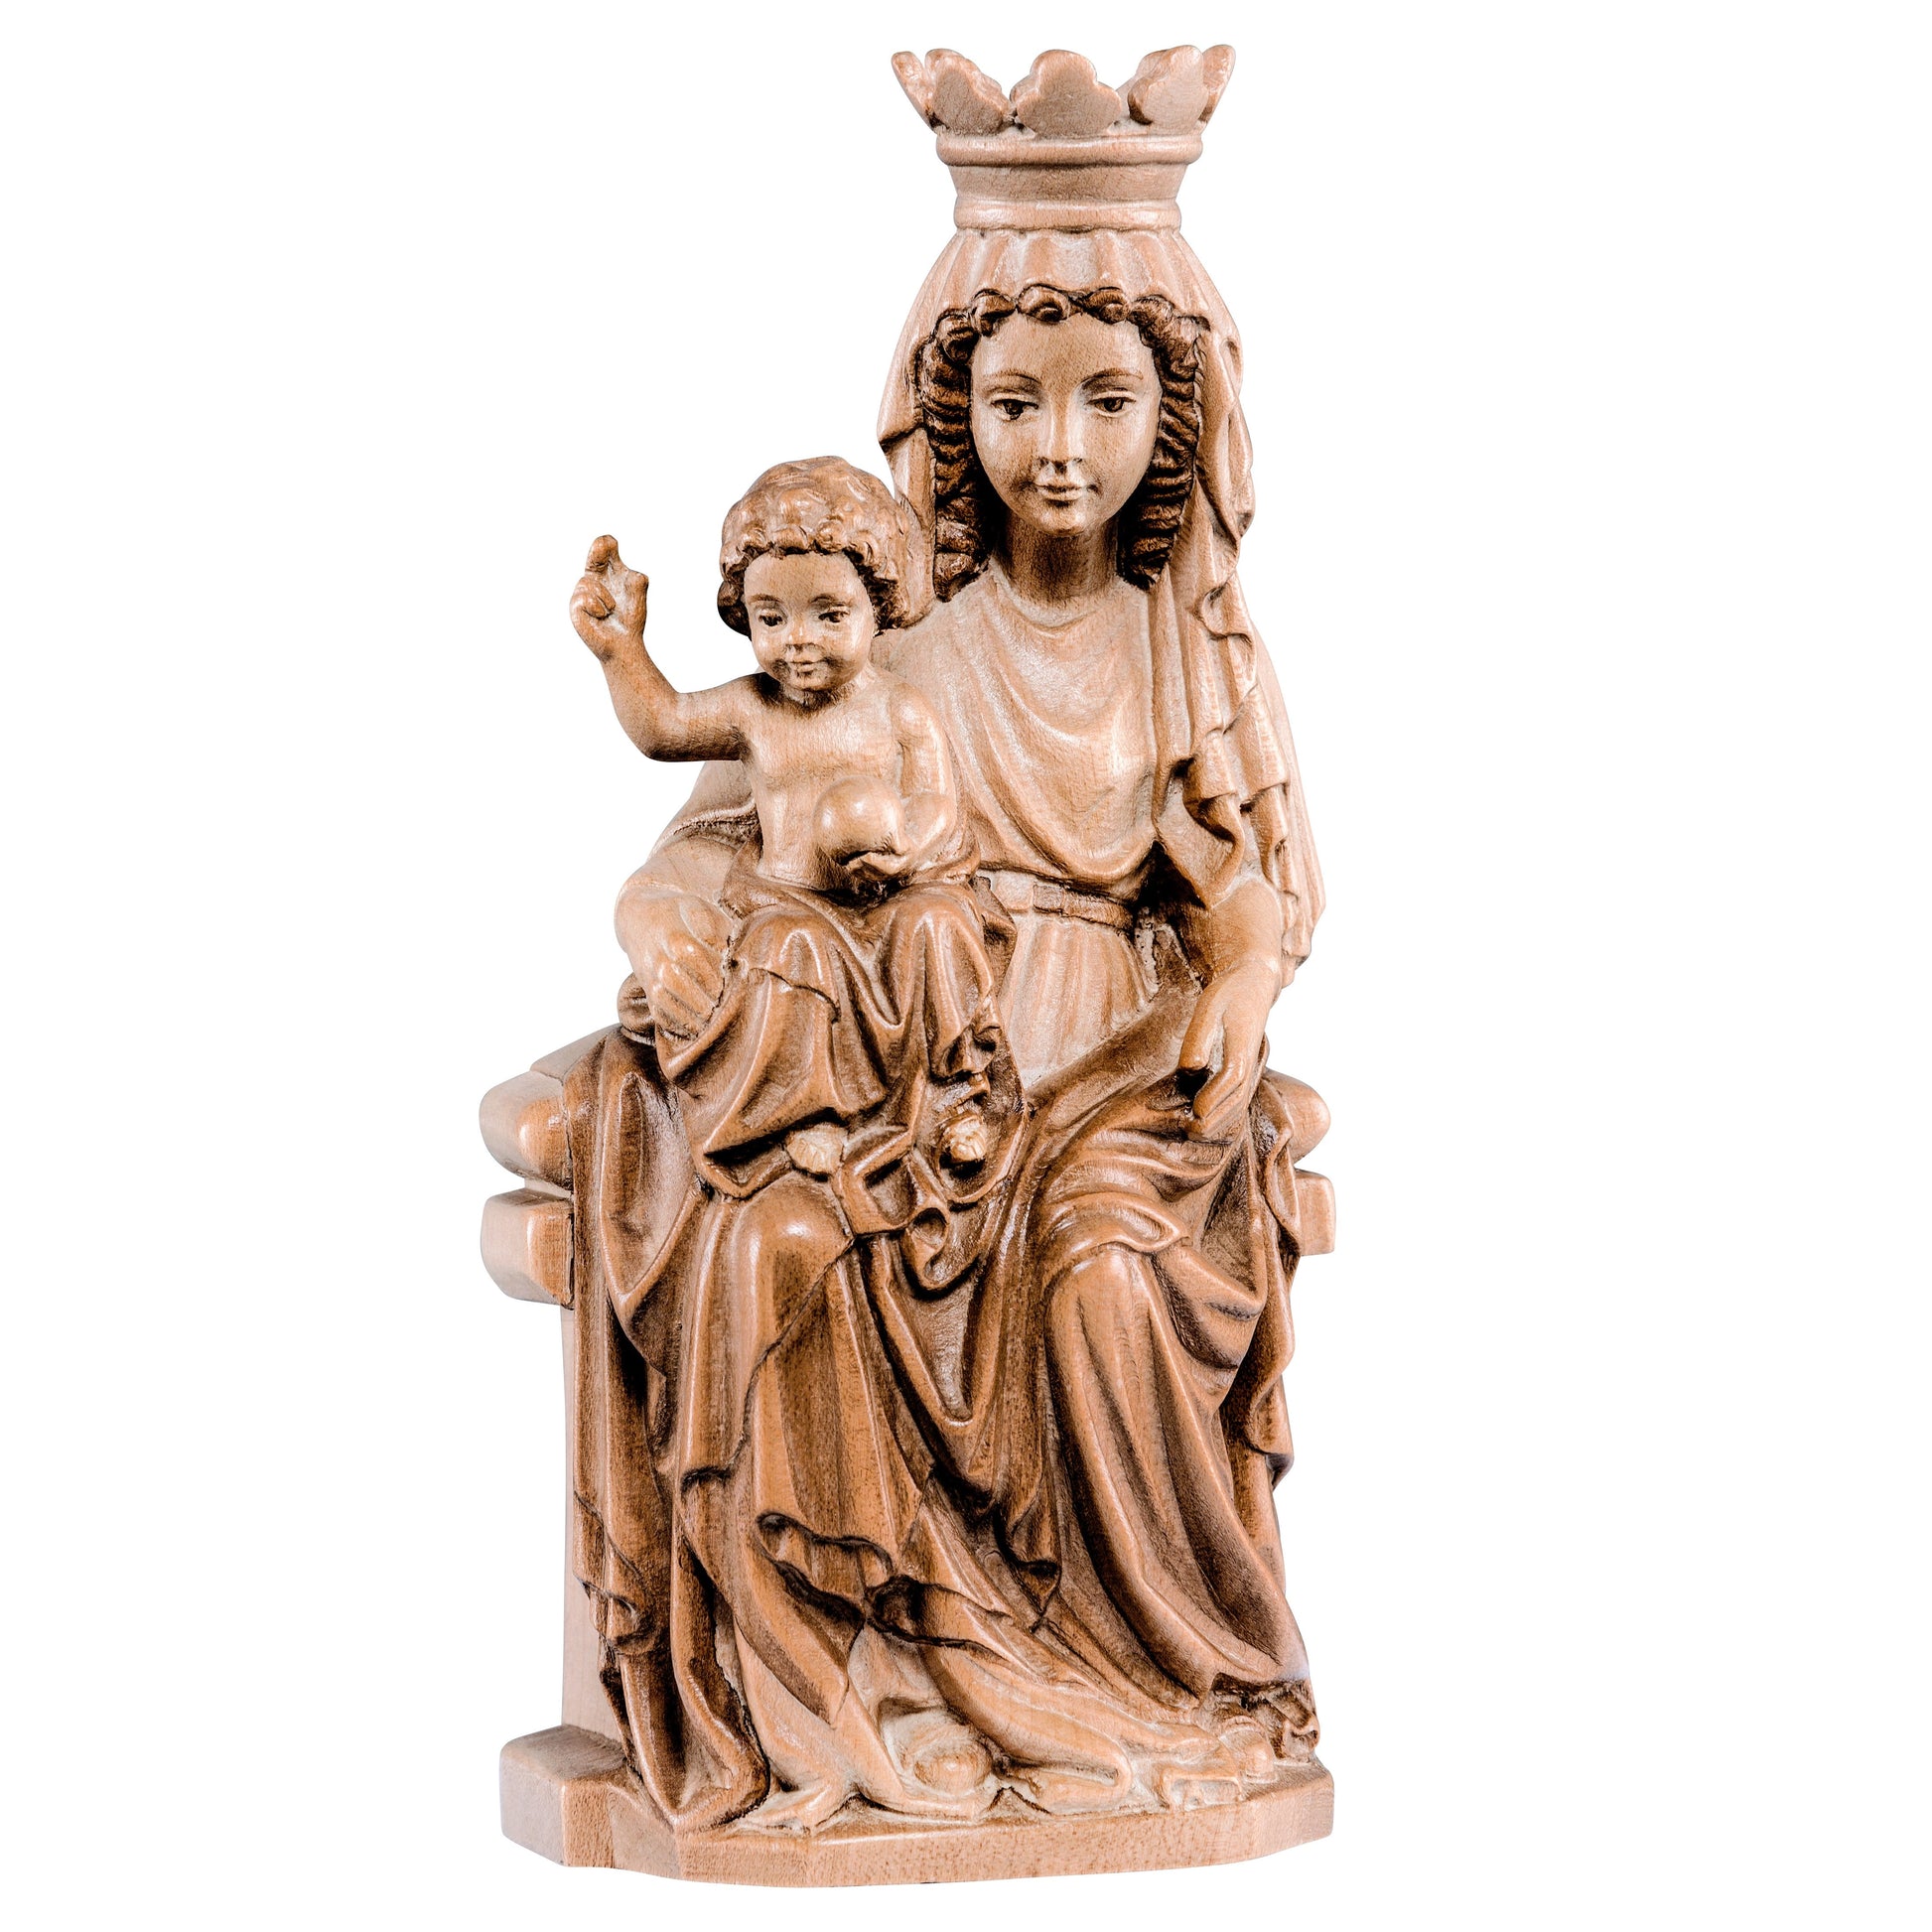 MONDO CATTOLICO Glossy / 16 cm (6.3 in) Wooden statue of Madonna of Prague